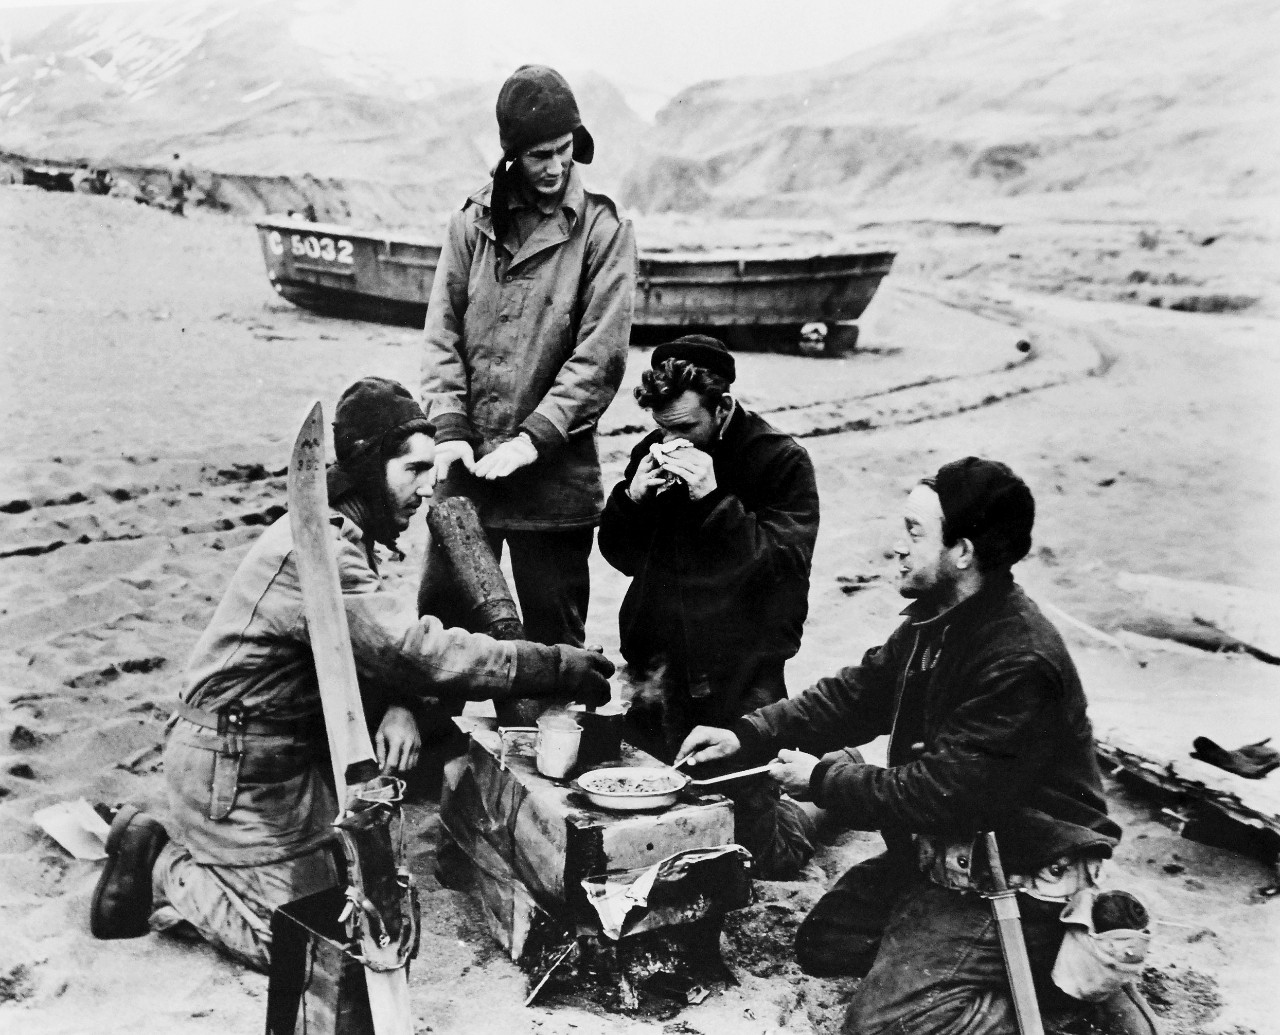 LC-Lot-803-26:  Aleutian Islands Campaign, June 1942 - August 1943.   Battle of Attu, May 11-29, 1943.   Allied Landing on Attu Island, May 11 1943.   The Chow Was Hot, The Company Congenial.  There was nothing fancy about this meal prepared by sailors in the Holtz Bay area on May 19, but the food was hot.  Note the ski standing upright in the foreground.  Snow can be found year round on Attu Island.  U.S. Navy photograph, released May 29, 1943.   Photographed through Mylar sleeve.  Courtesy of the Library of Congress.  (2015/11/06).